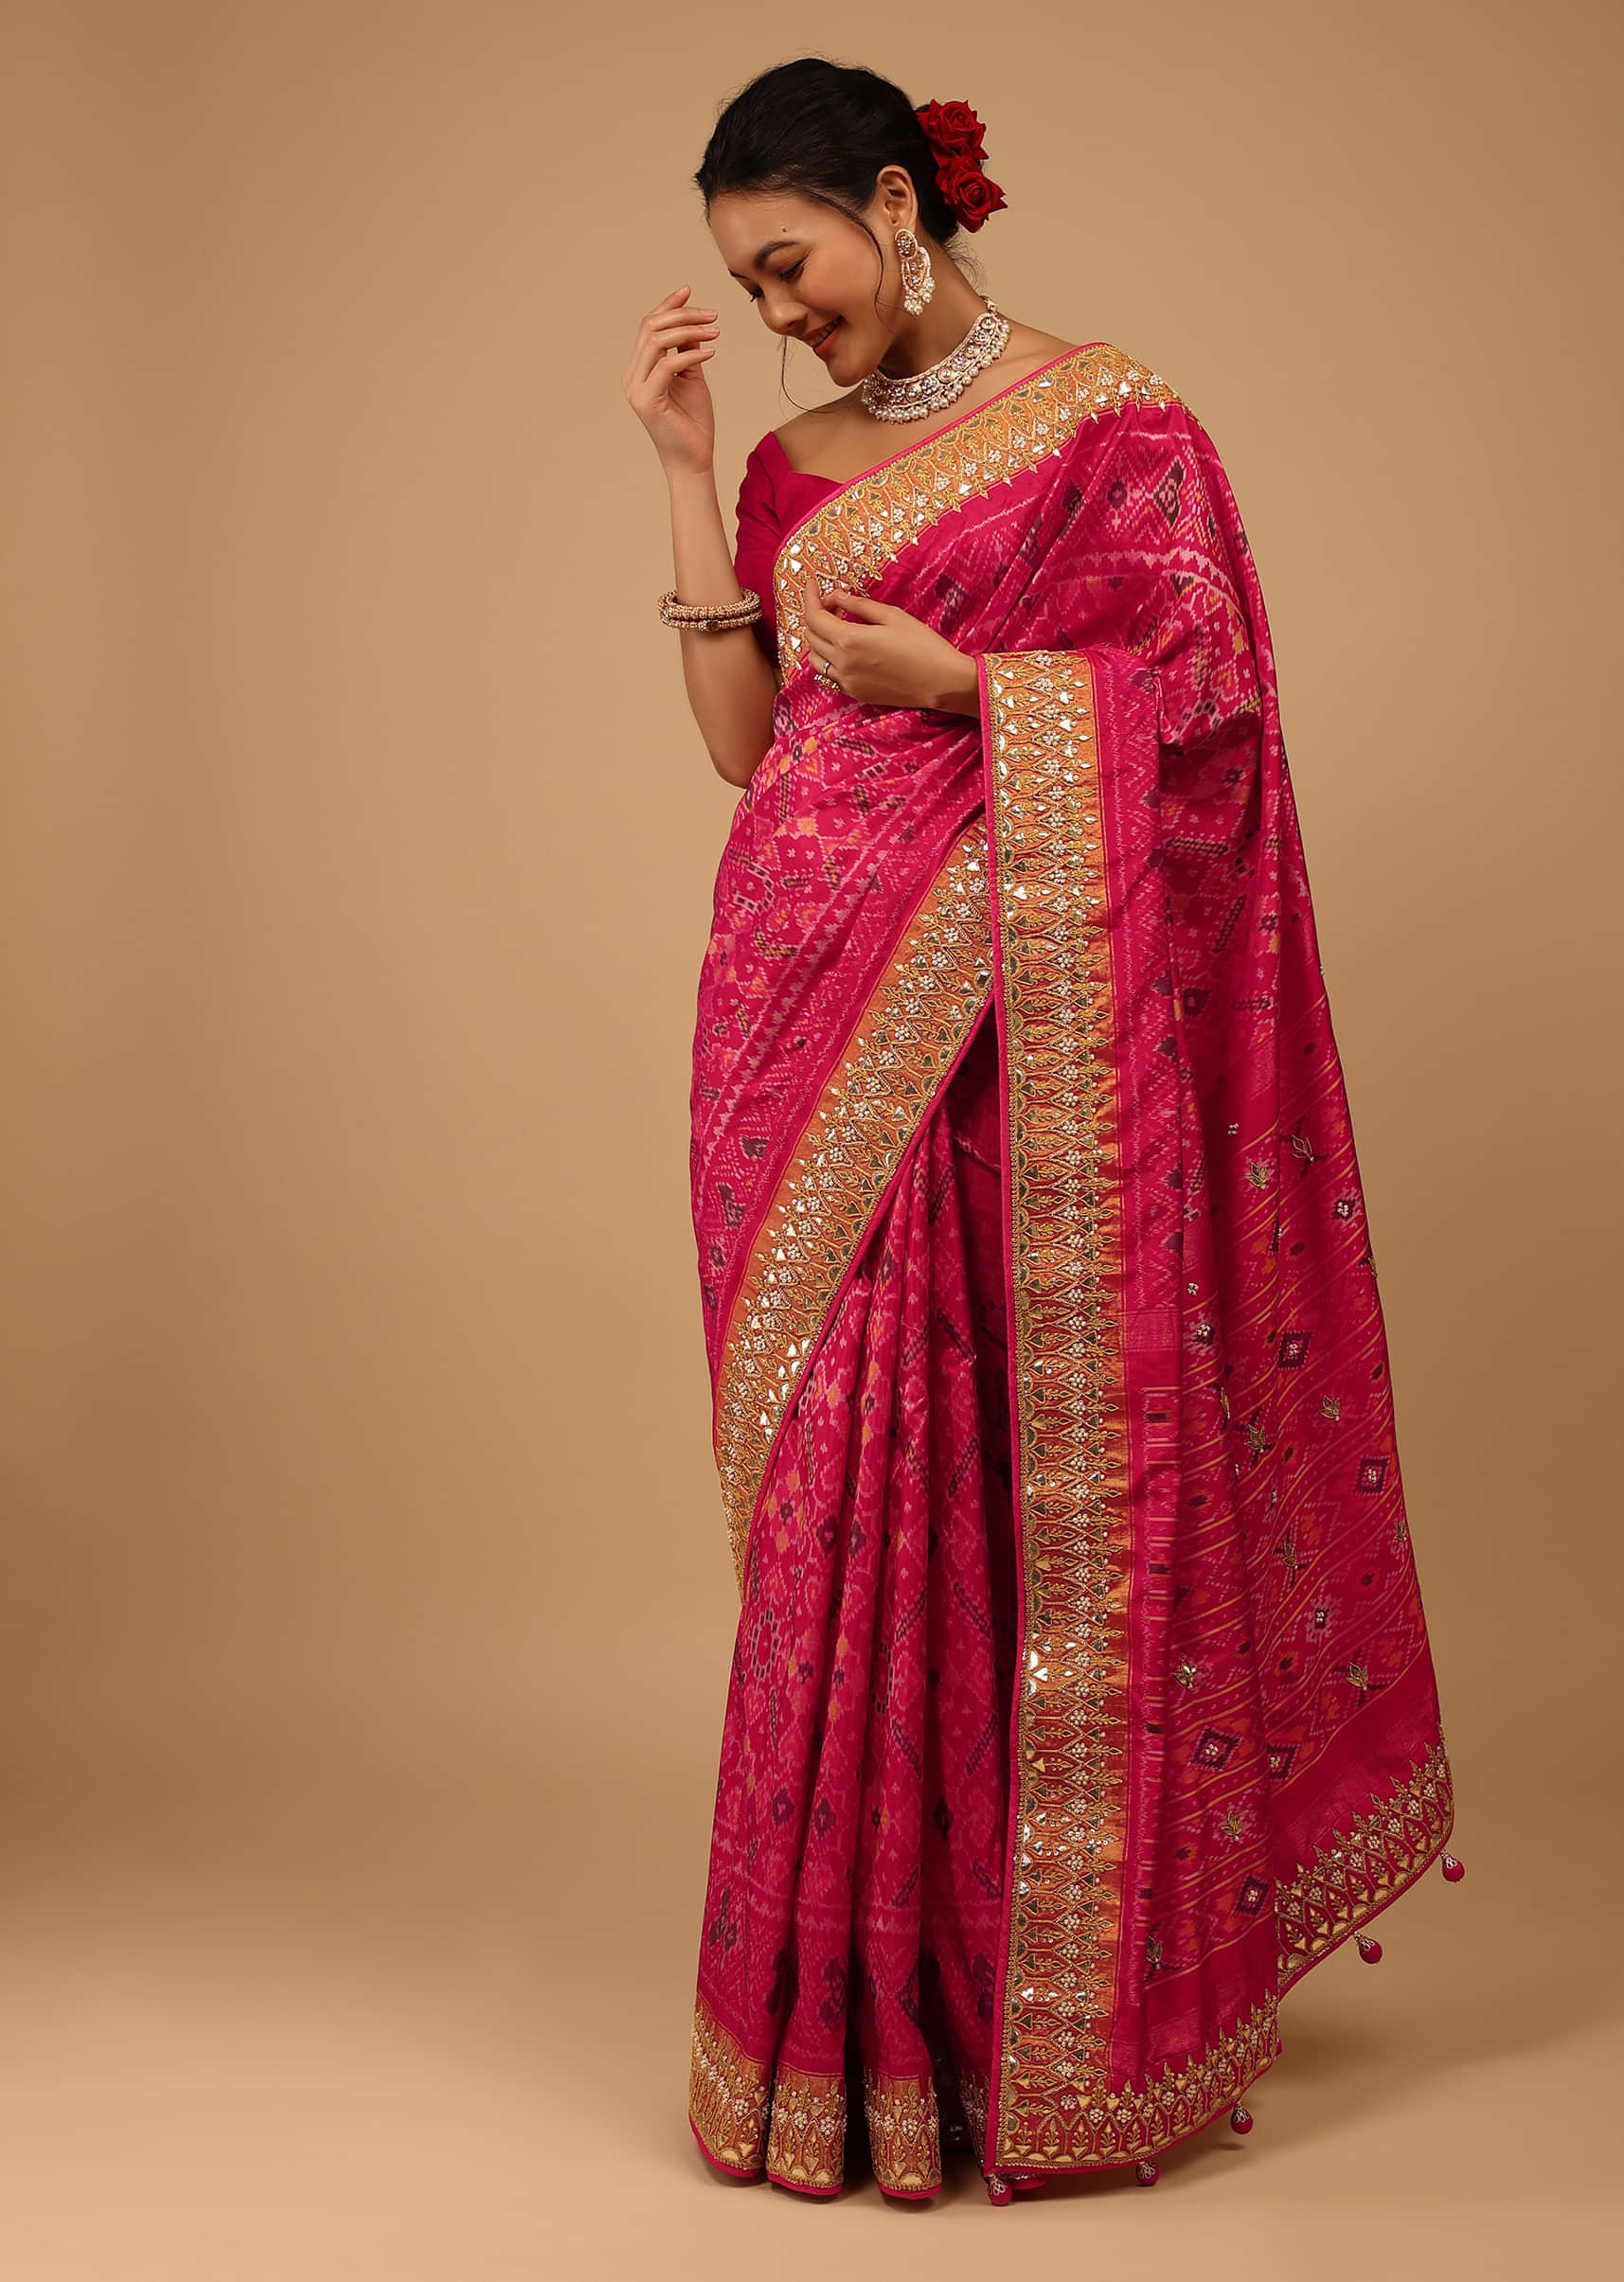 Bright Rose Pink Saree In Pure Silk With Handloom Patola Ikat Weave